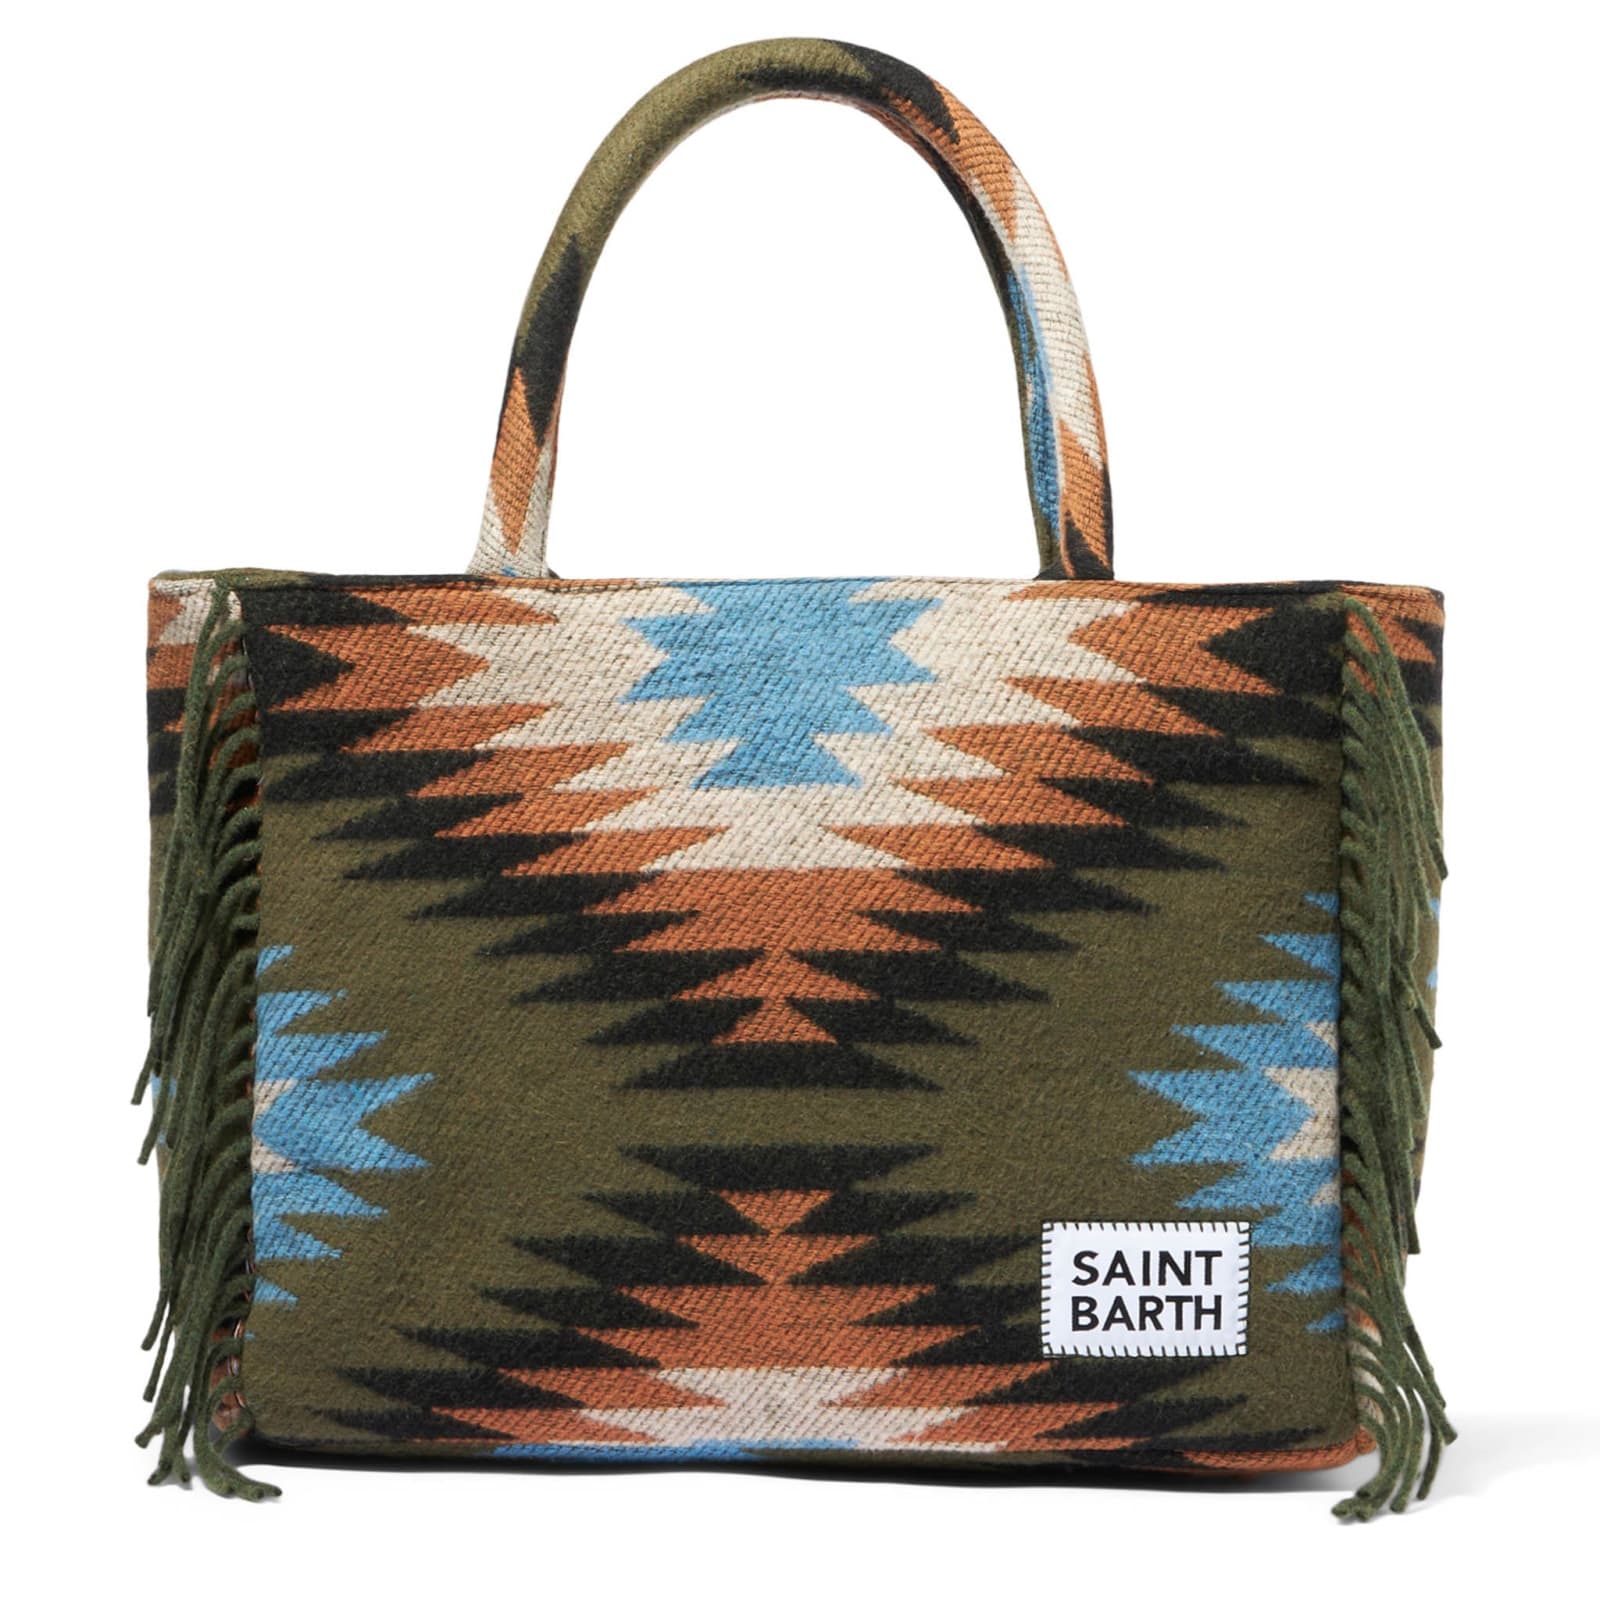 Mc2 Saint Barth Vanity Shoulder Bag With Ethnic Print And Fringes In Multicolor